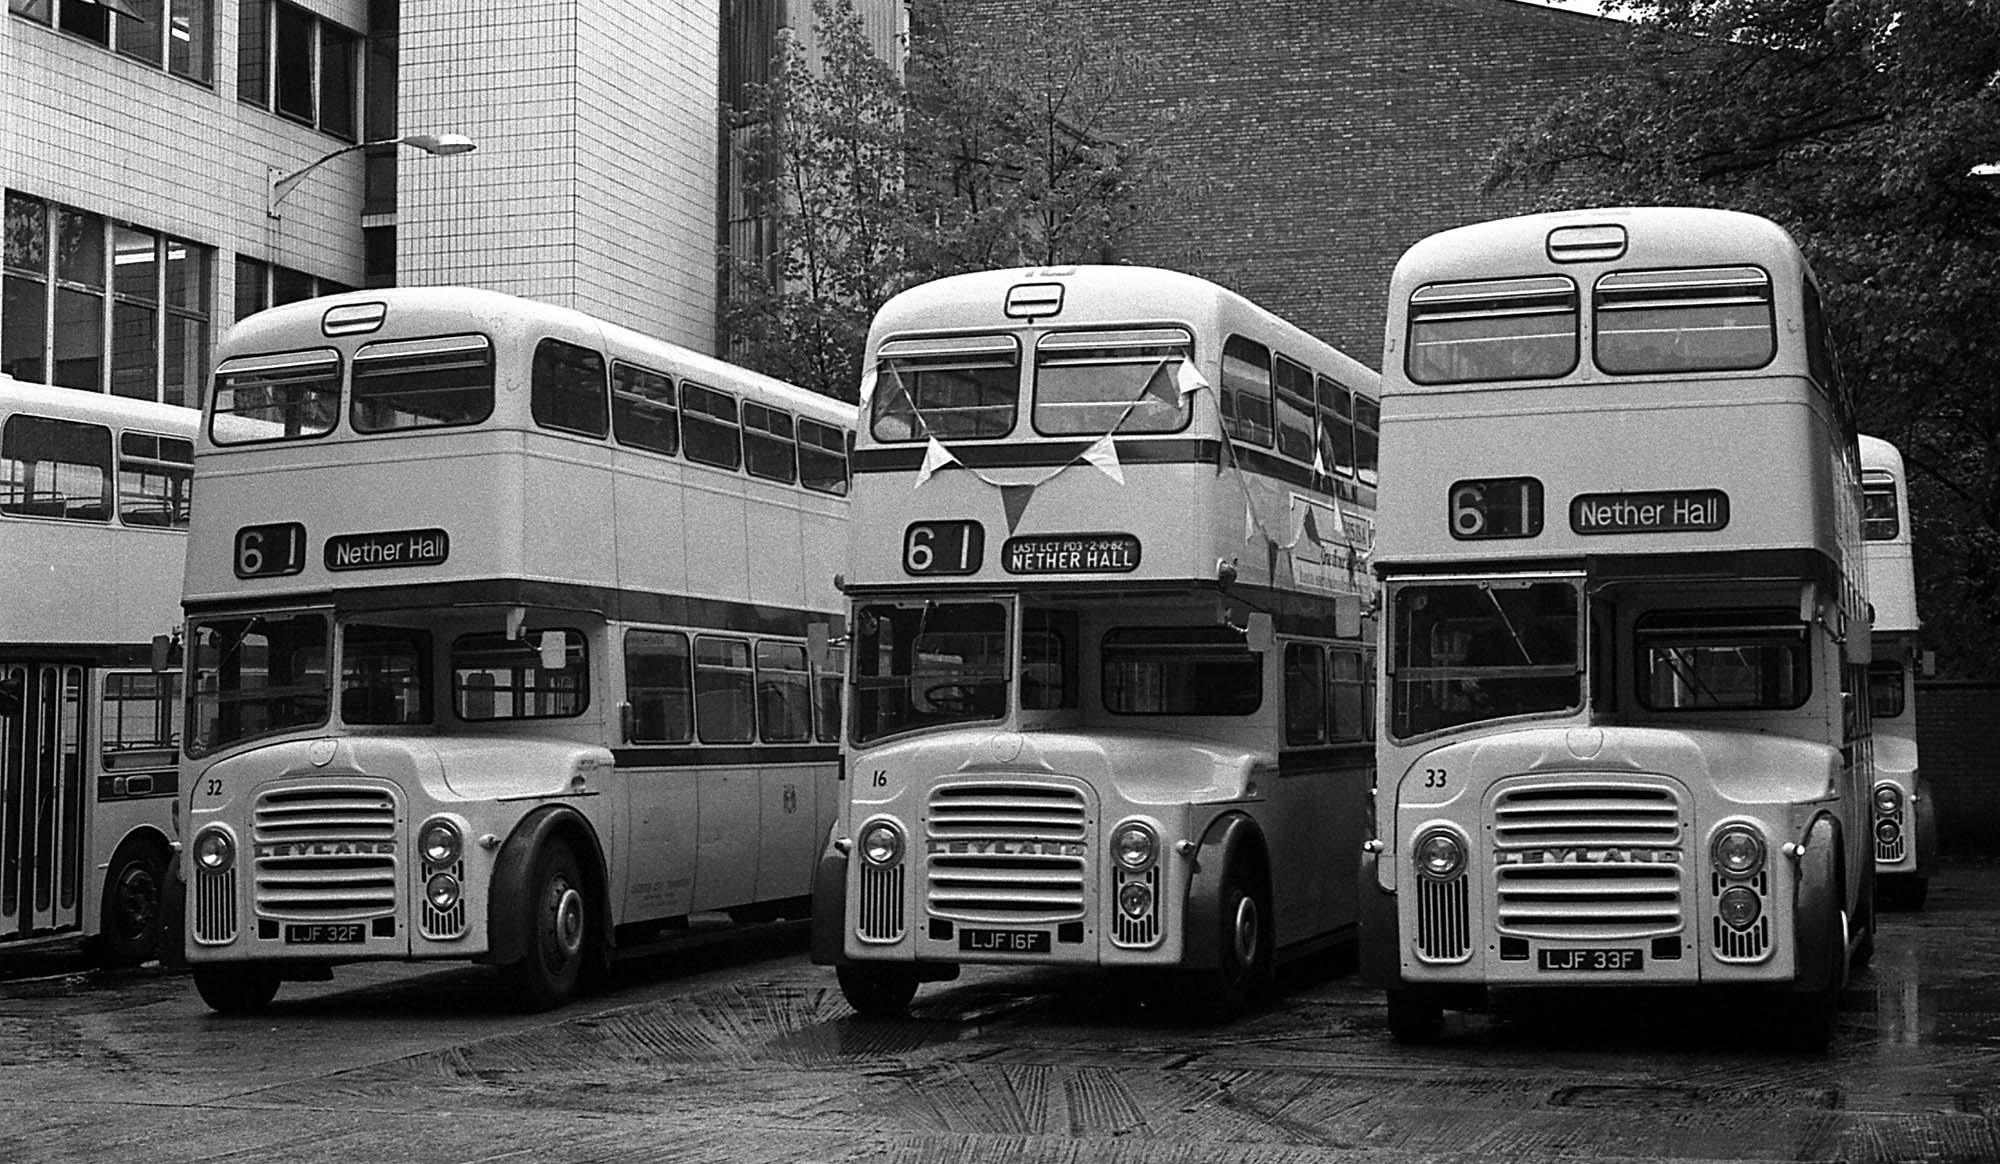 The rear yard of the bus depot where the buses were parked in narrow bays - Leicester Transport Heritage Trust, Rob Haywood and Keith Wood